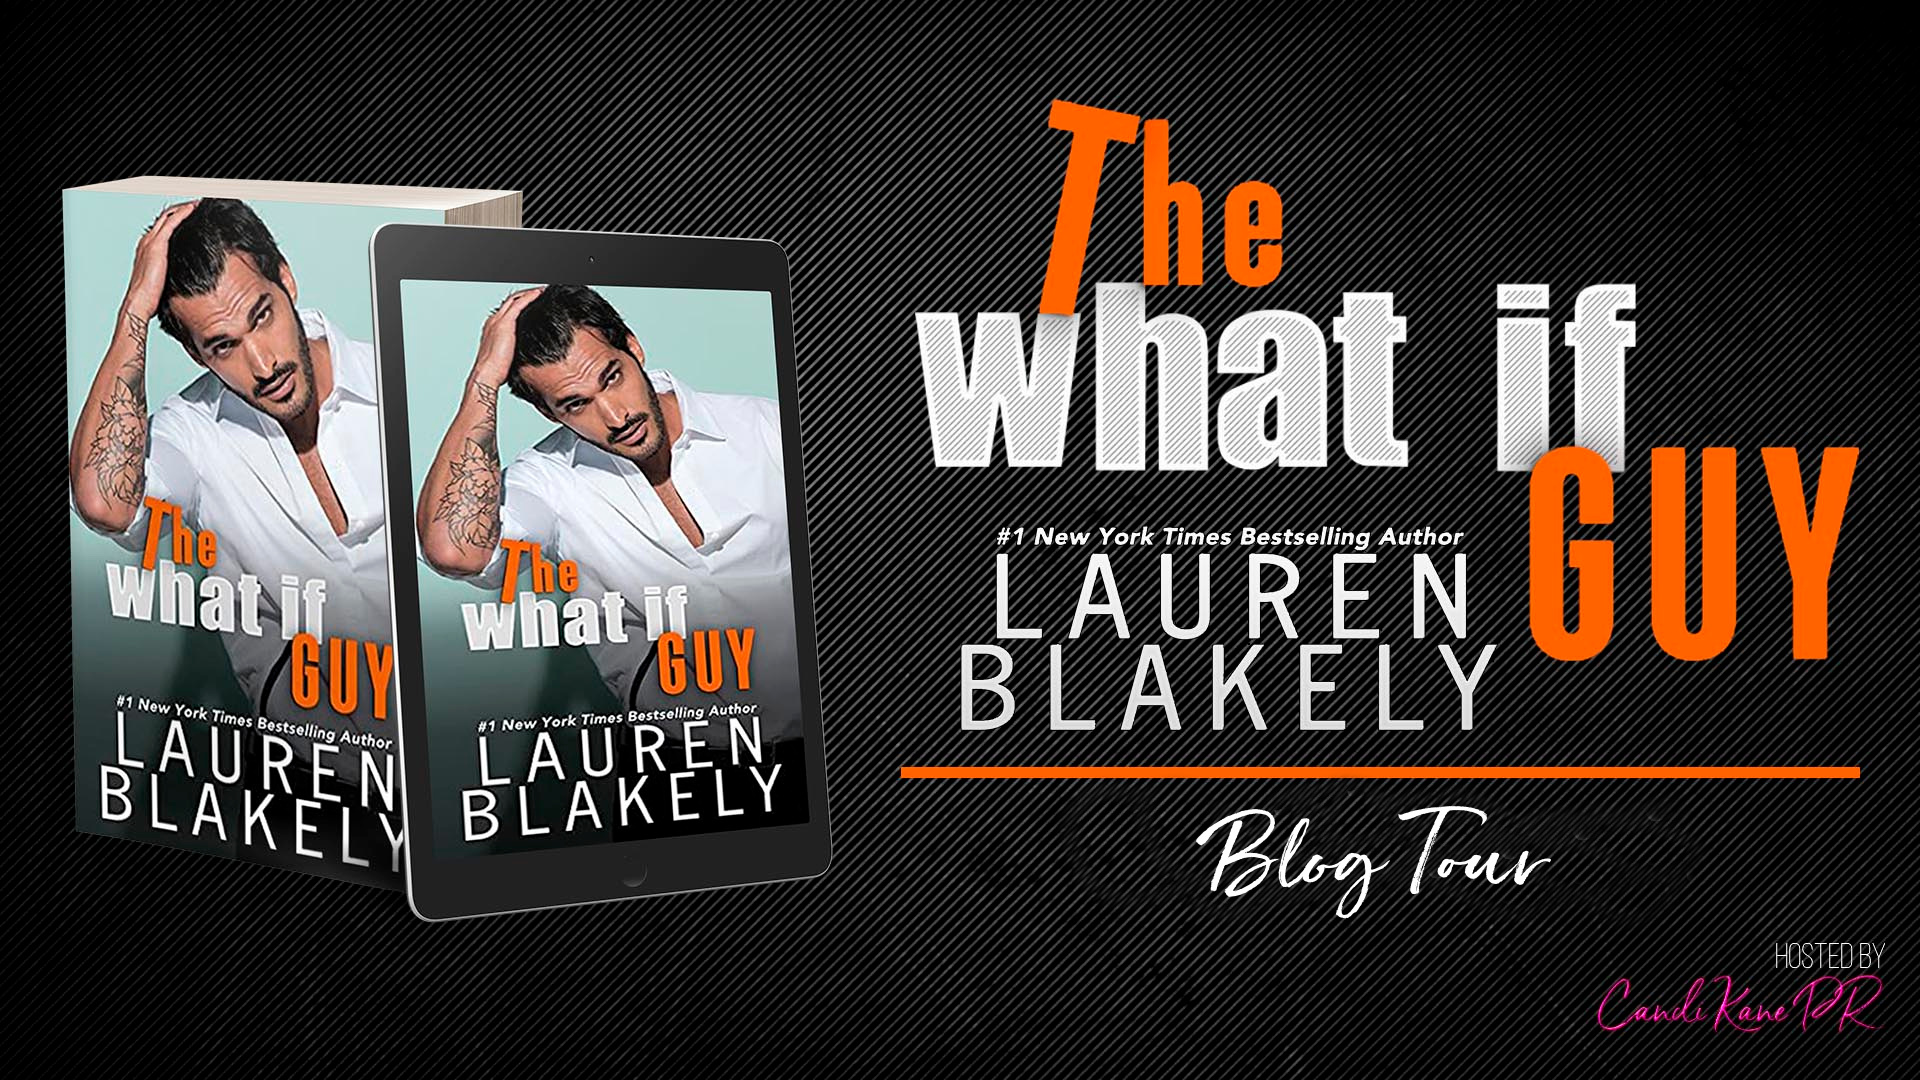 Review: The What If Guy by Lauren Blakely